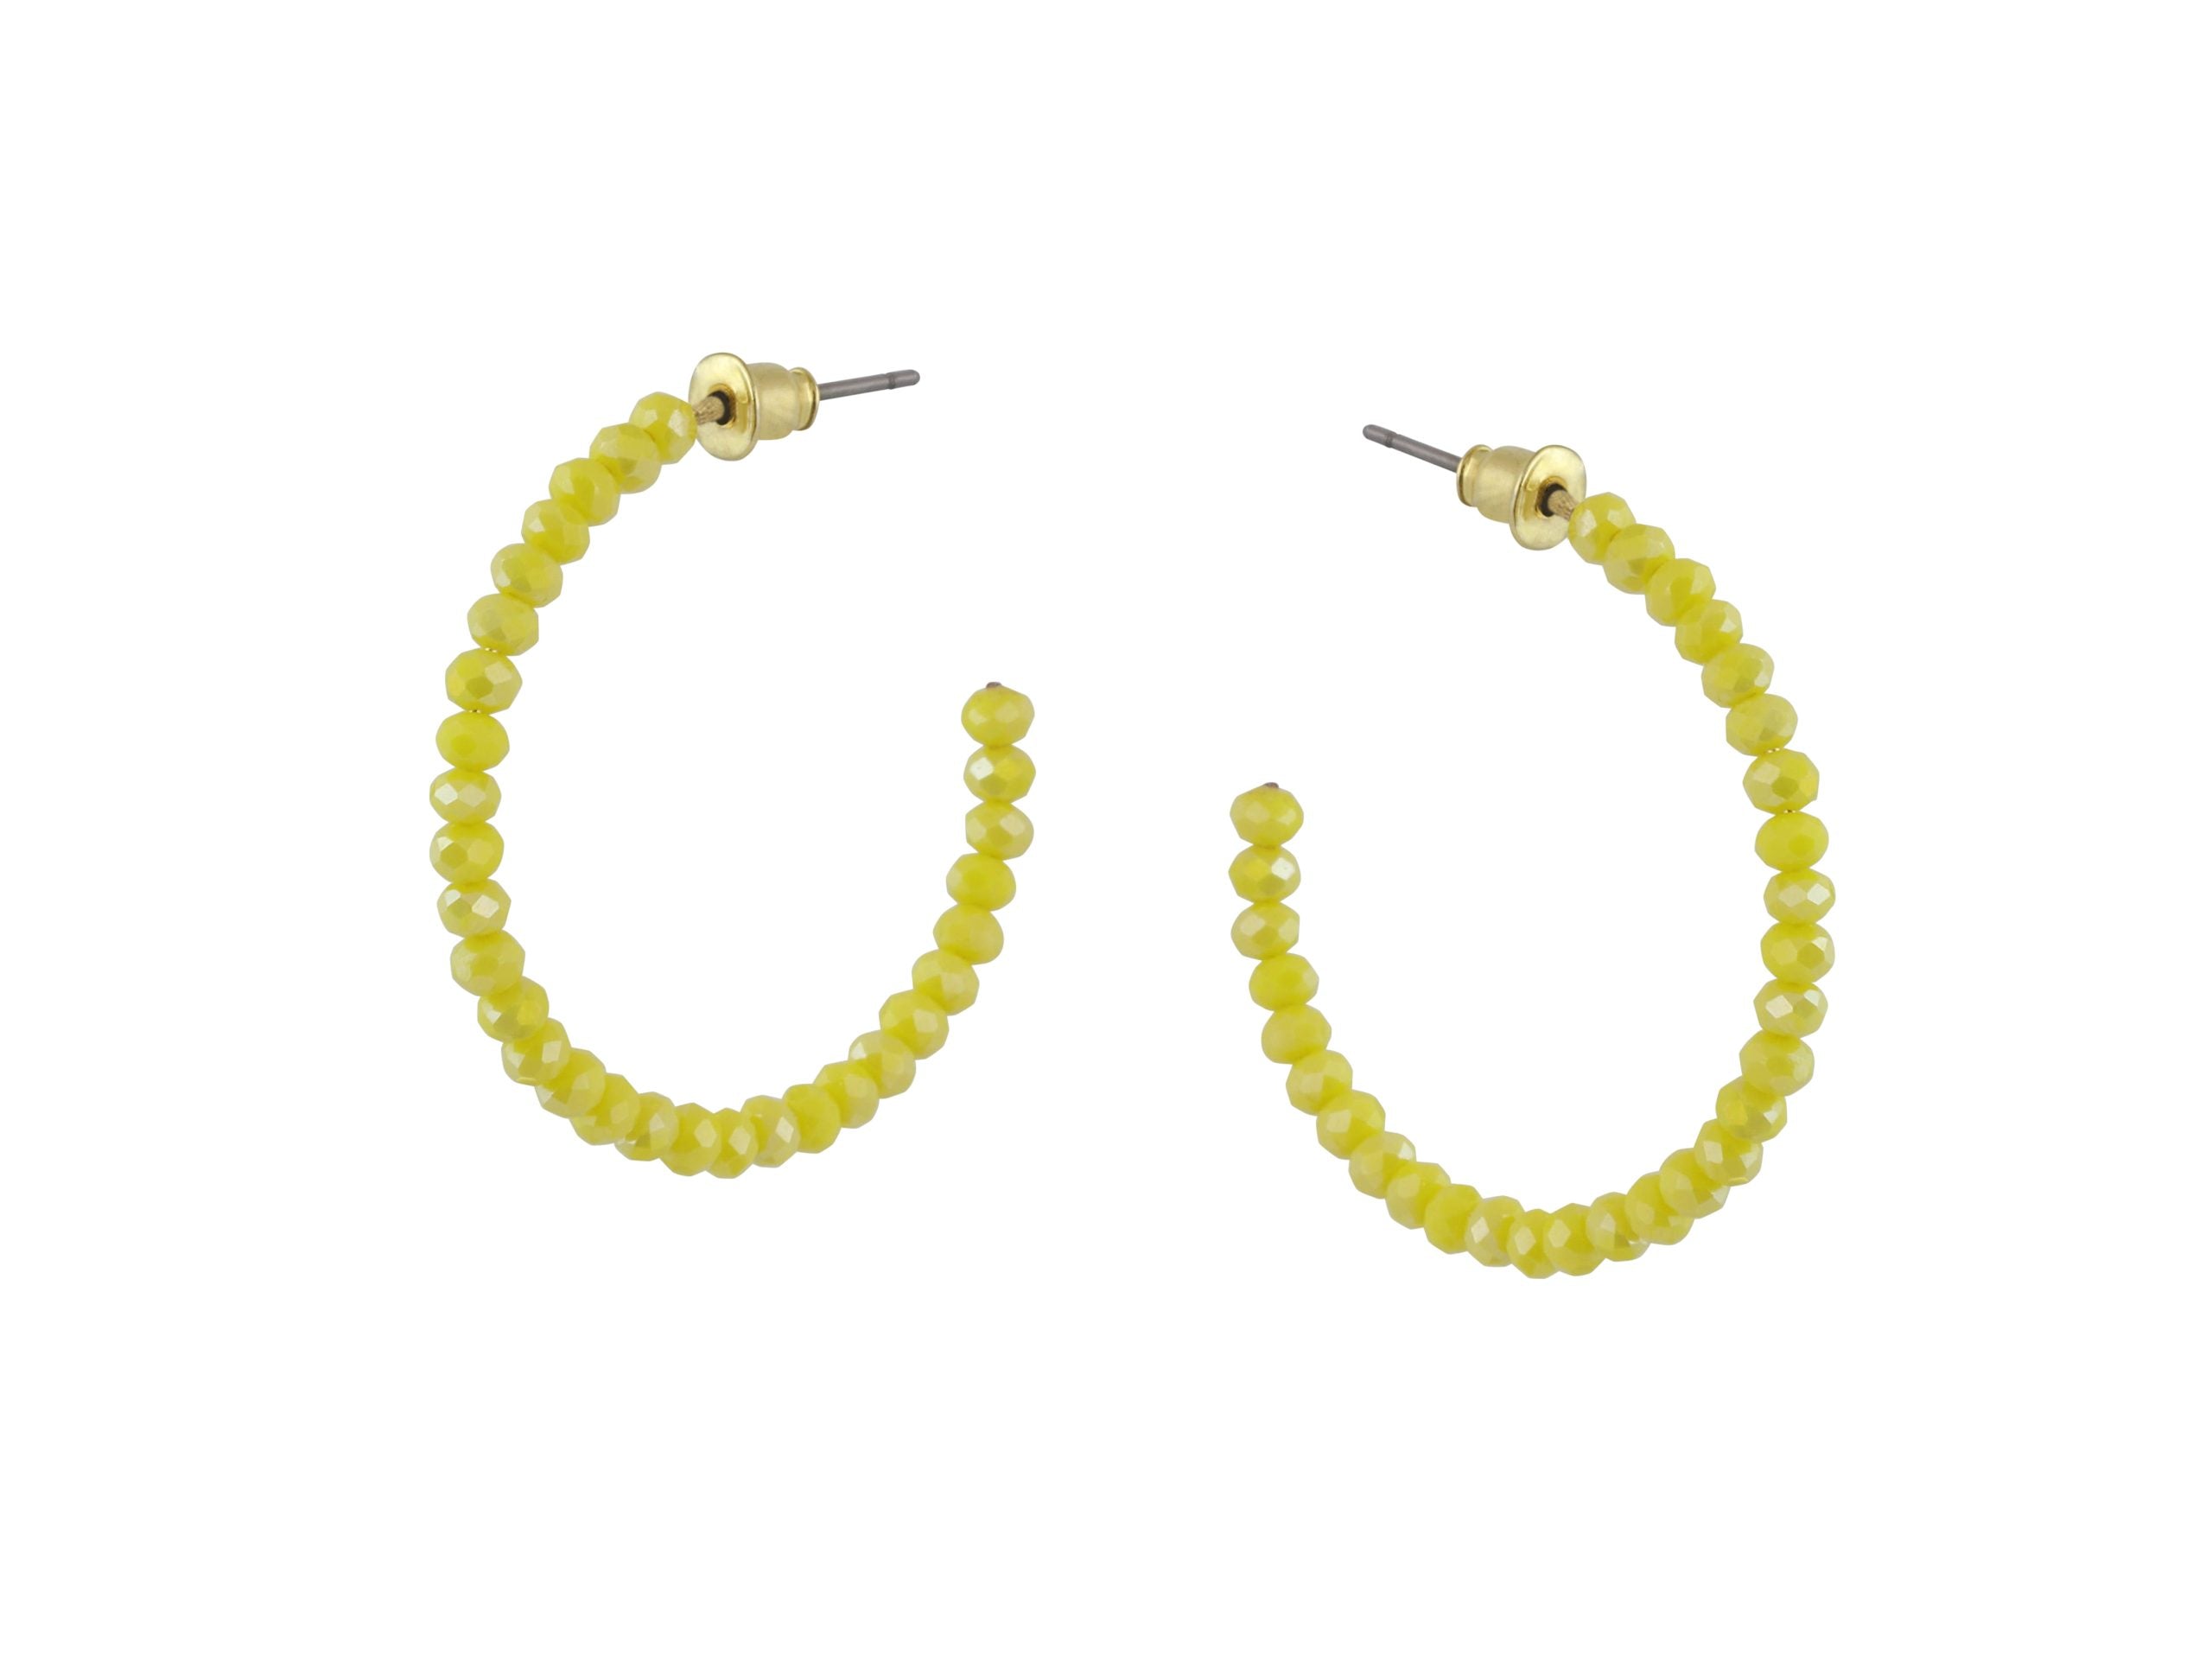 Yellow Olympia Beaded Hoops - The Nancy Smillie Shop - Art, Jewellery & Designer Gifts Glasgow